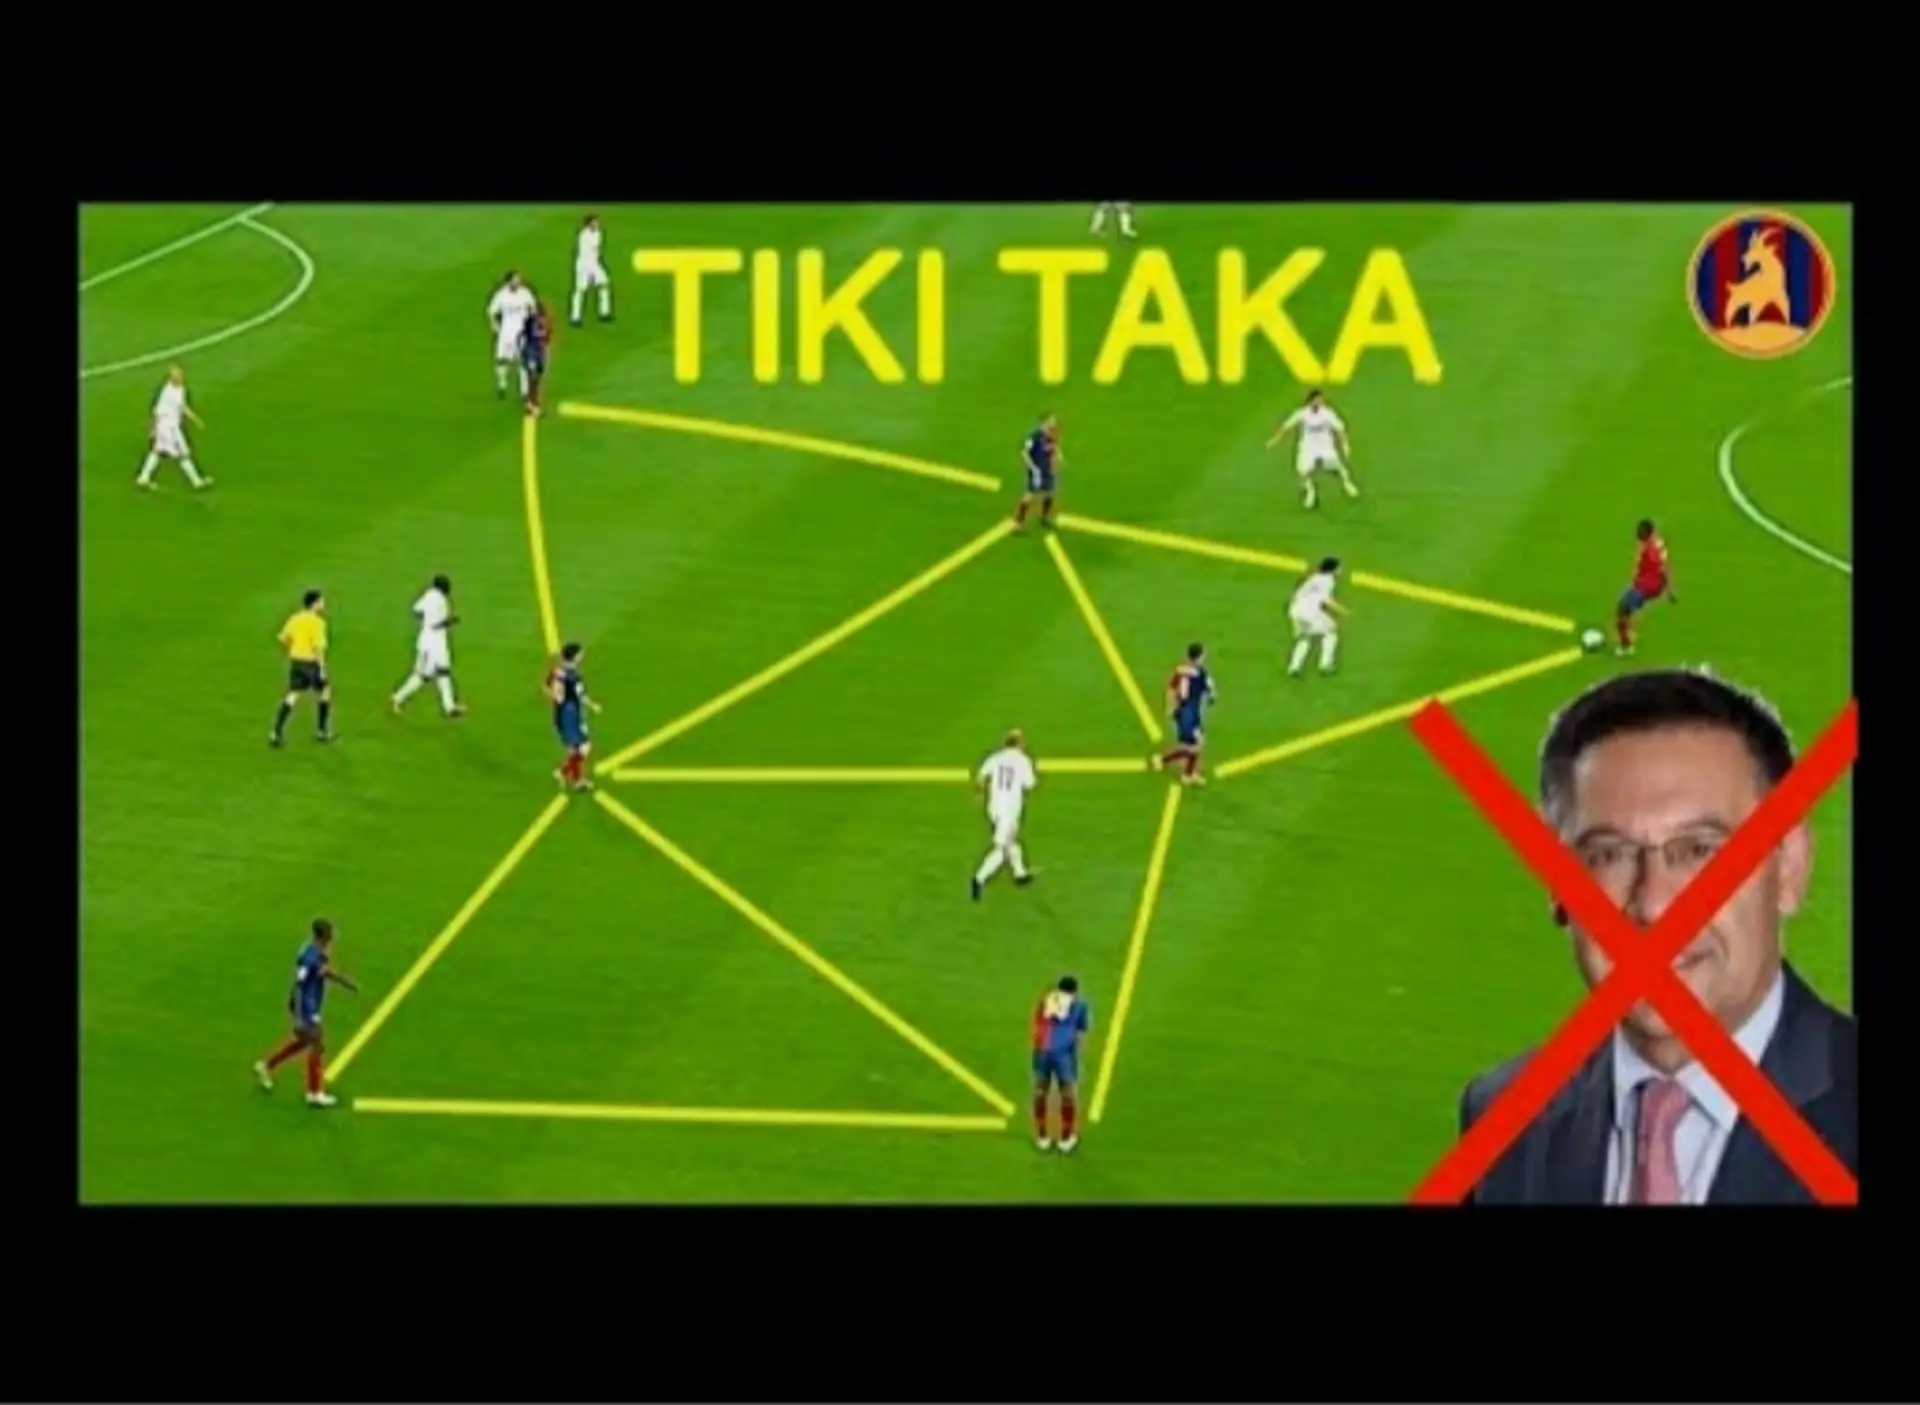 A MYTH - TIKI TAKA IS OUTDATED #FIFA21CONTEST